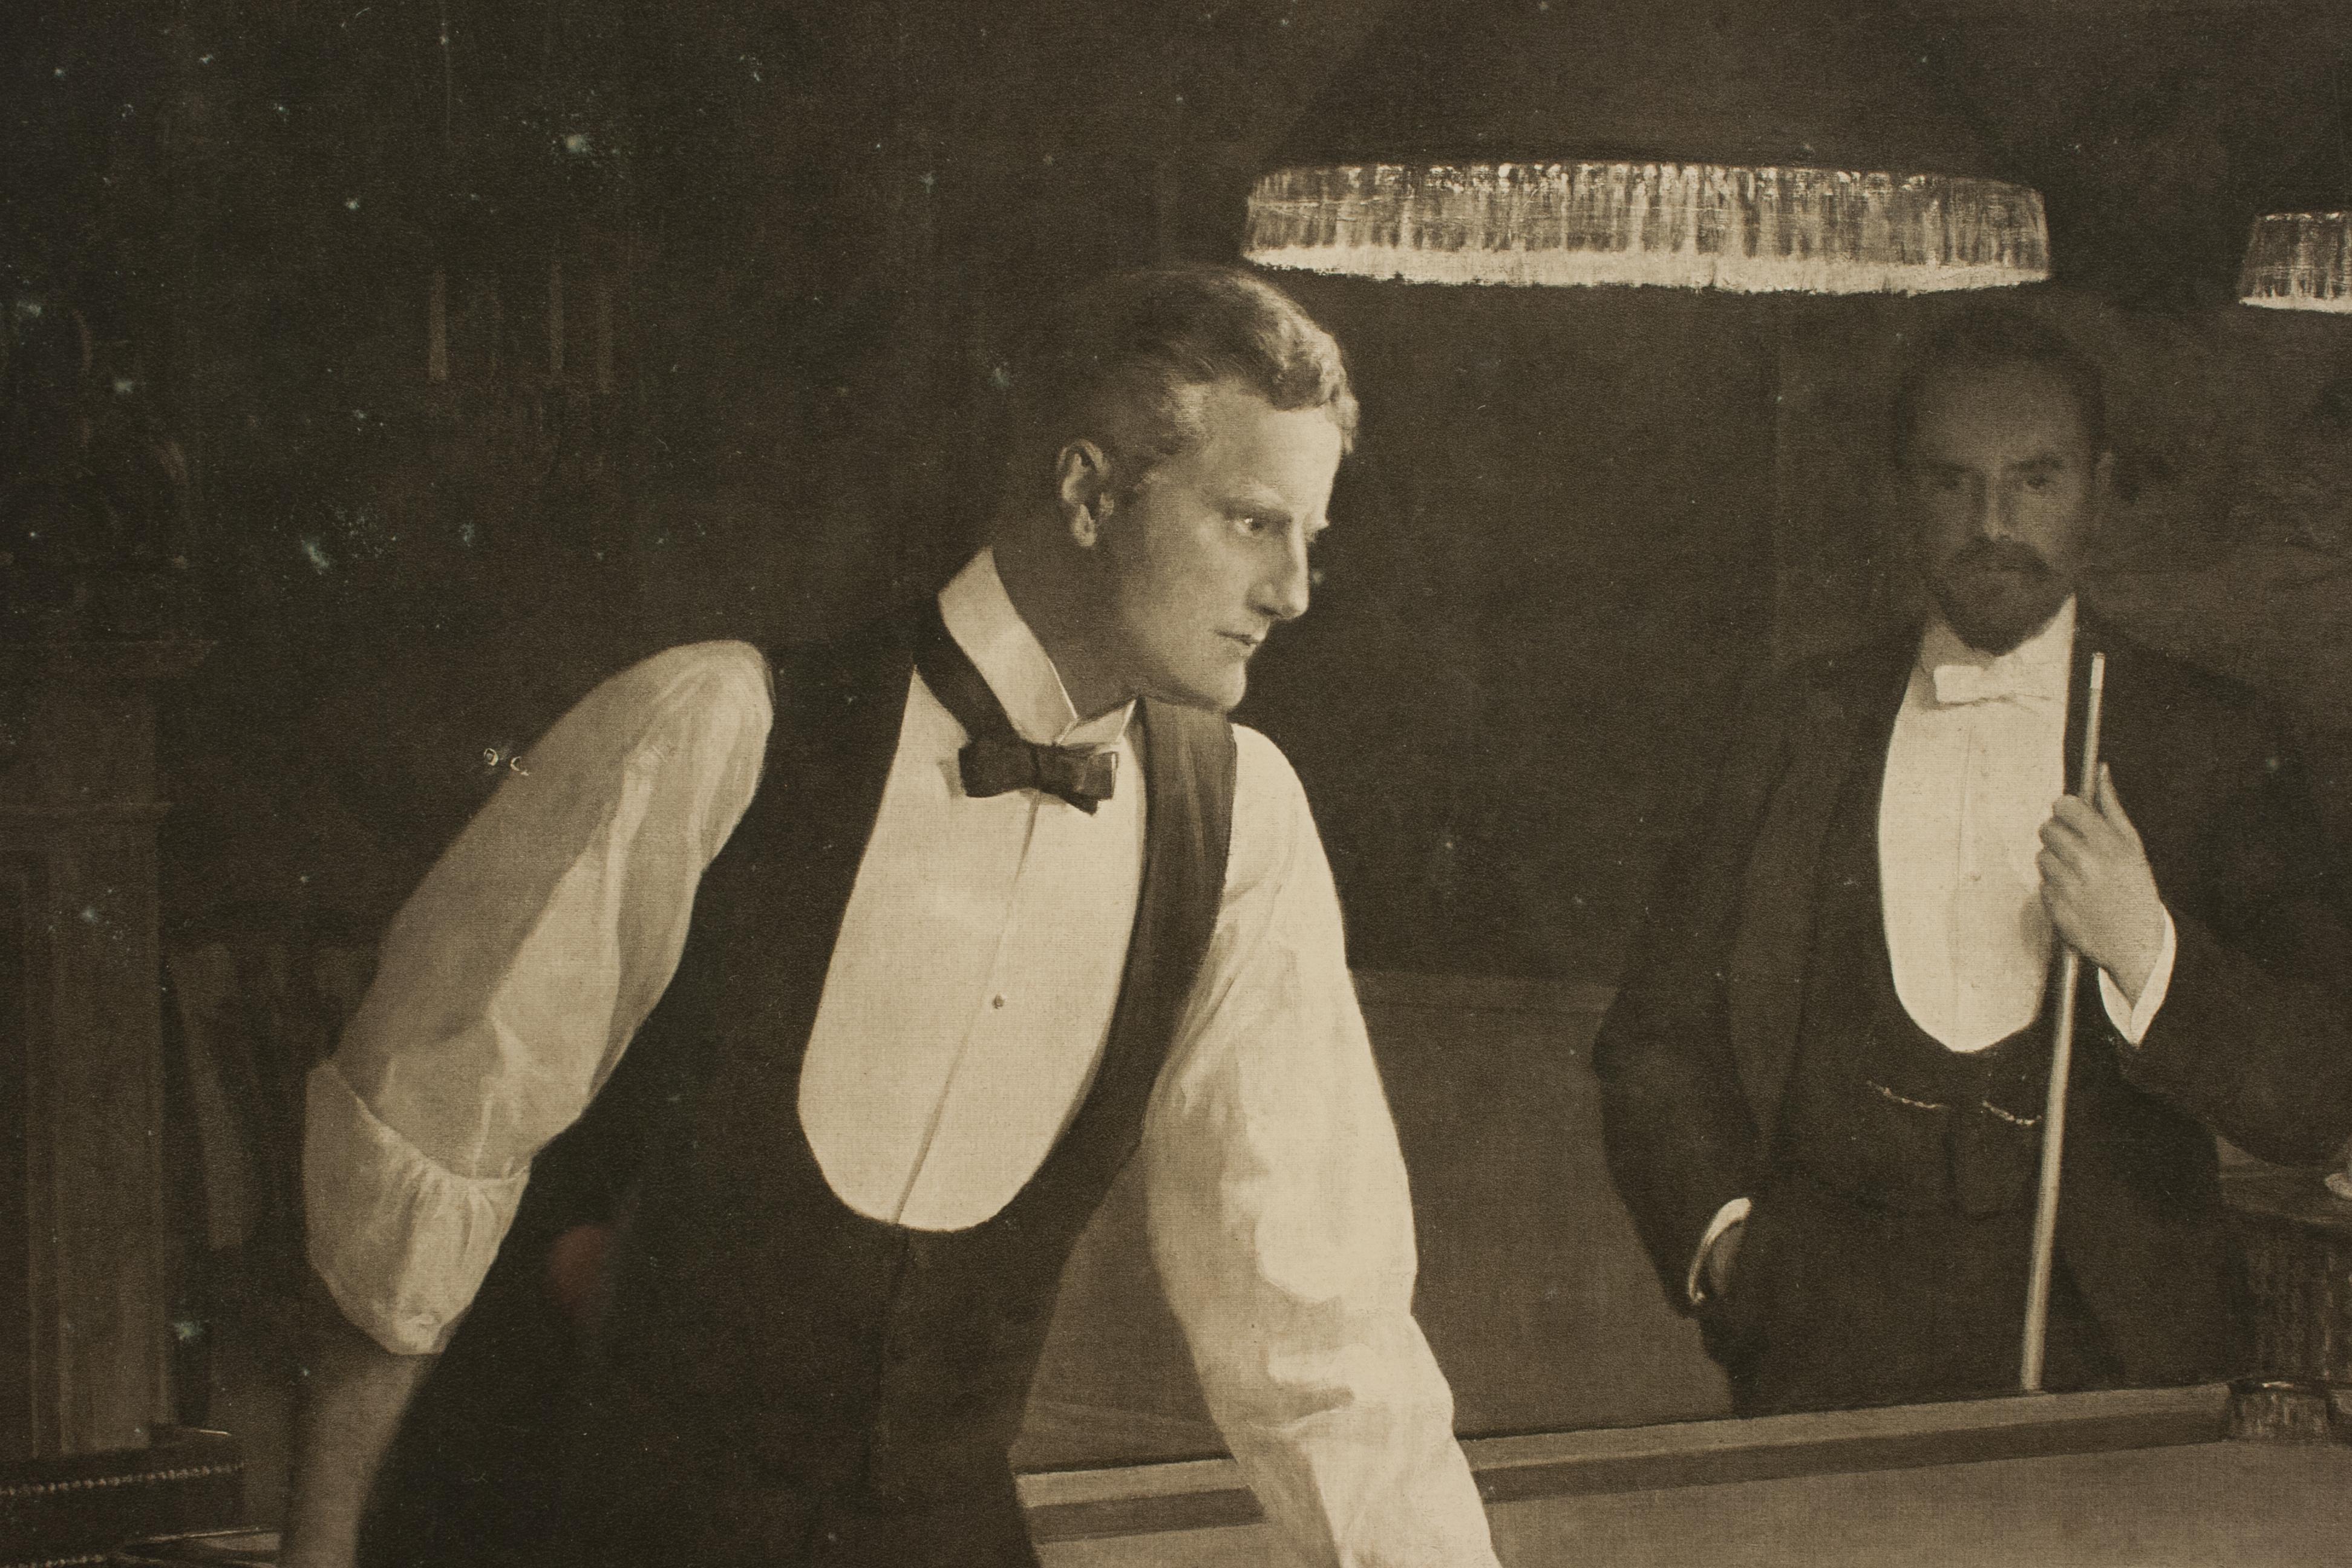 Billiard Players, Billiard, Snooker Print After John Collier In Good Condition For Sale In Oxfordshire, GB